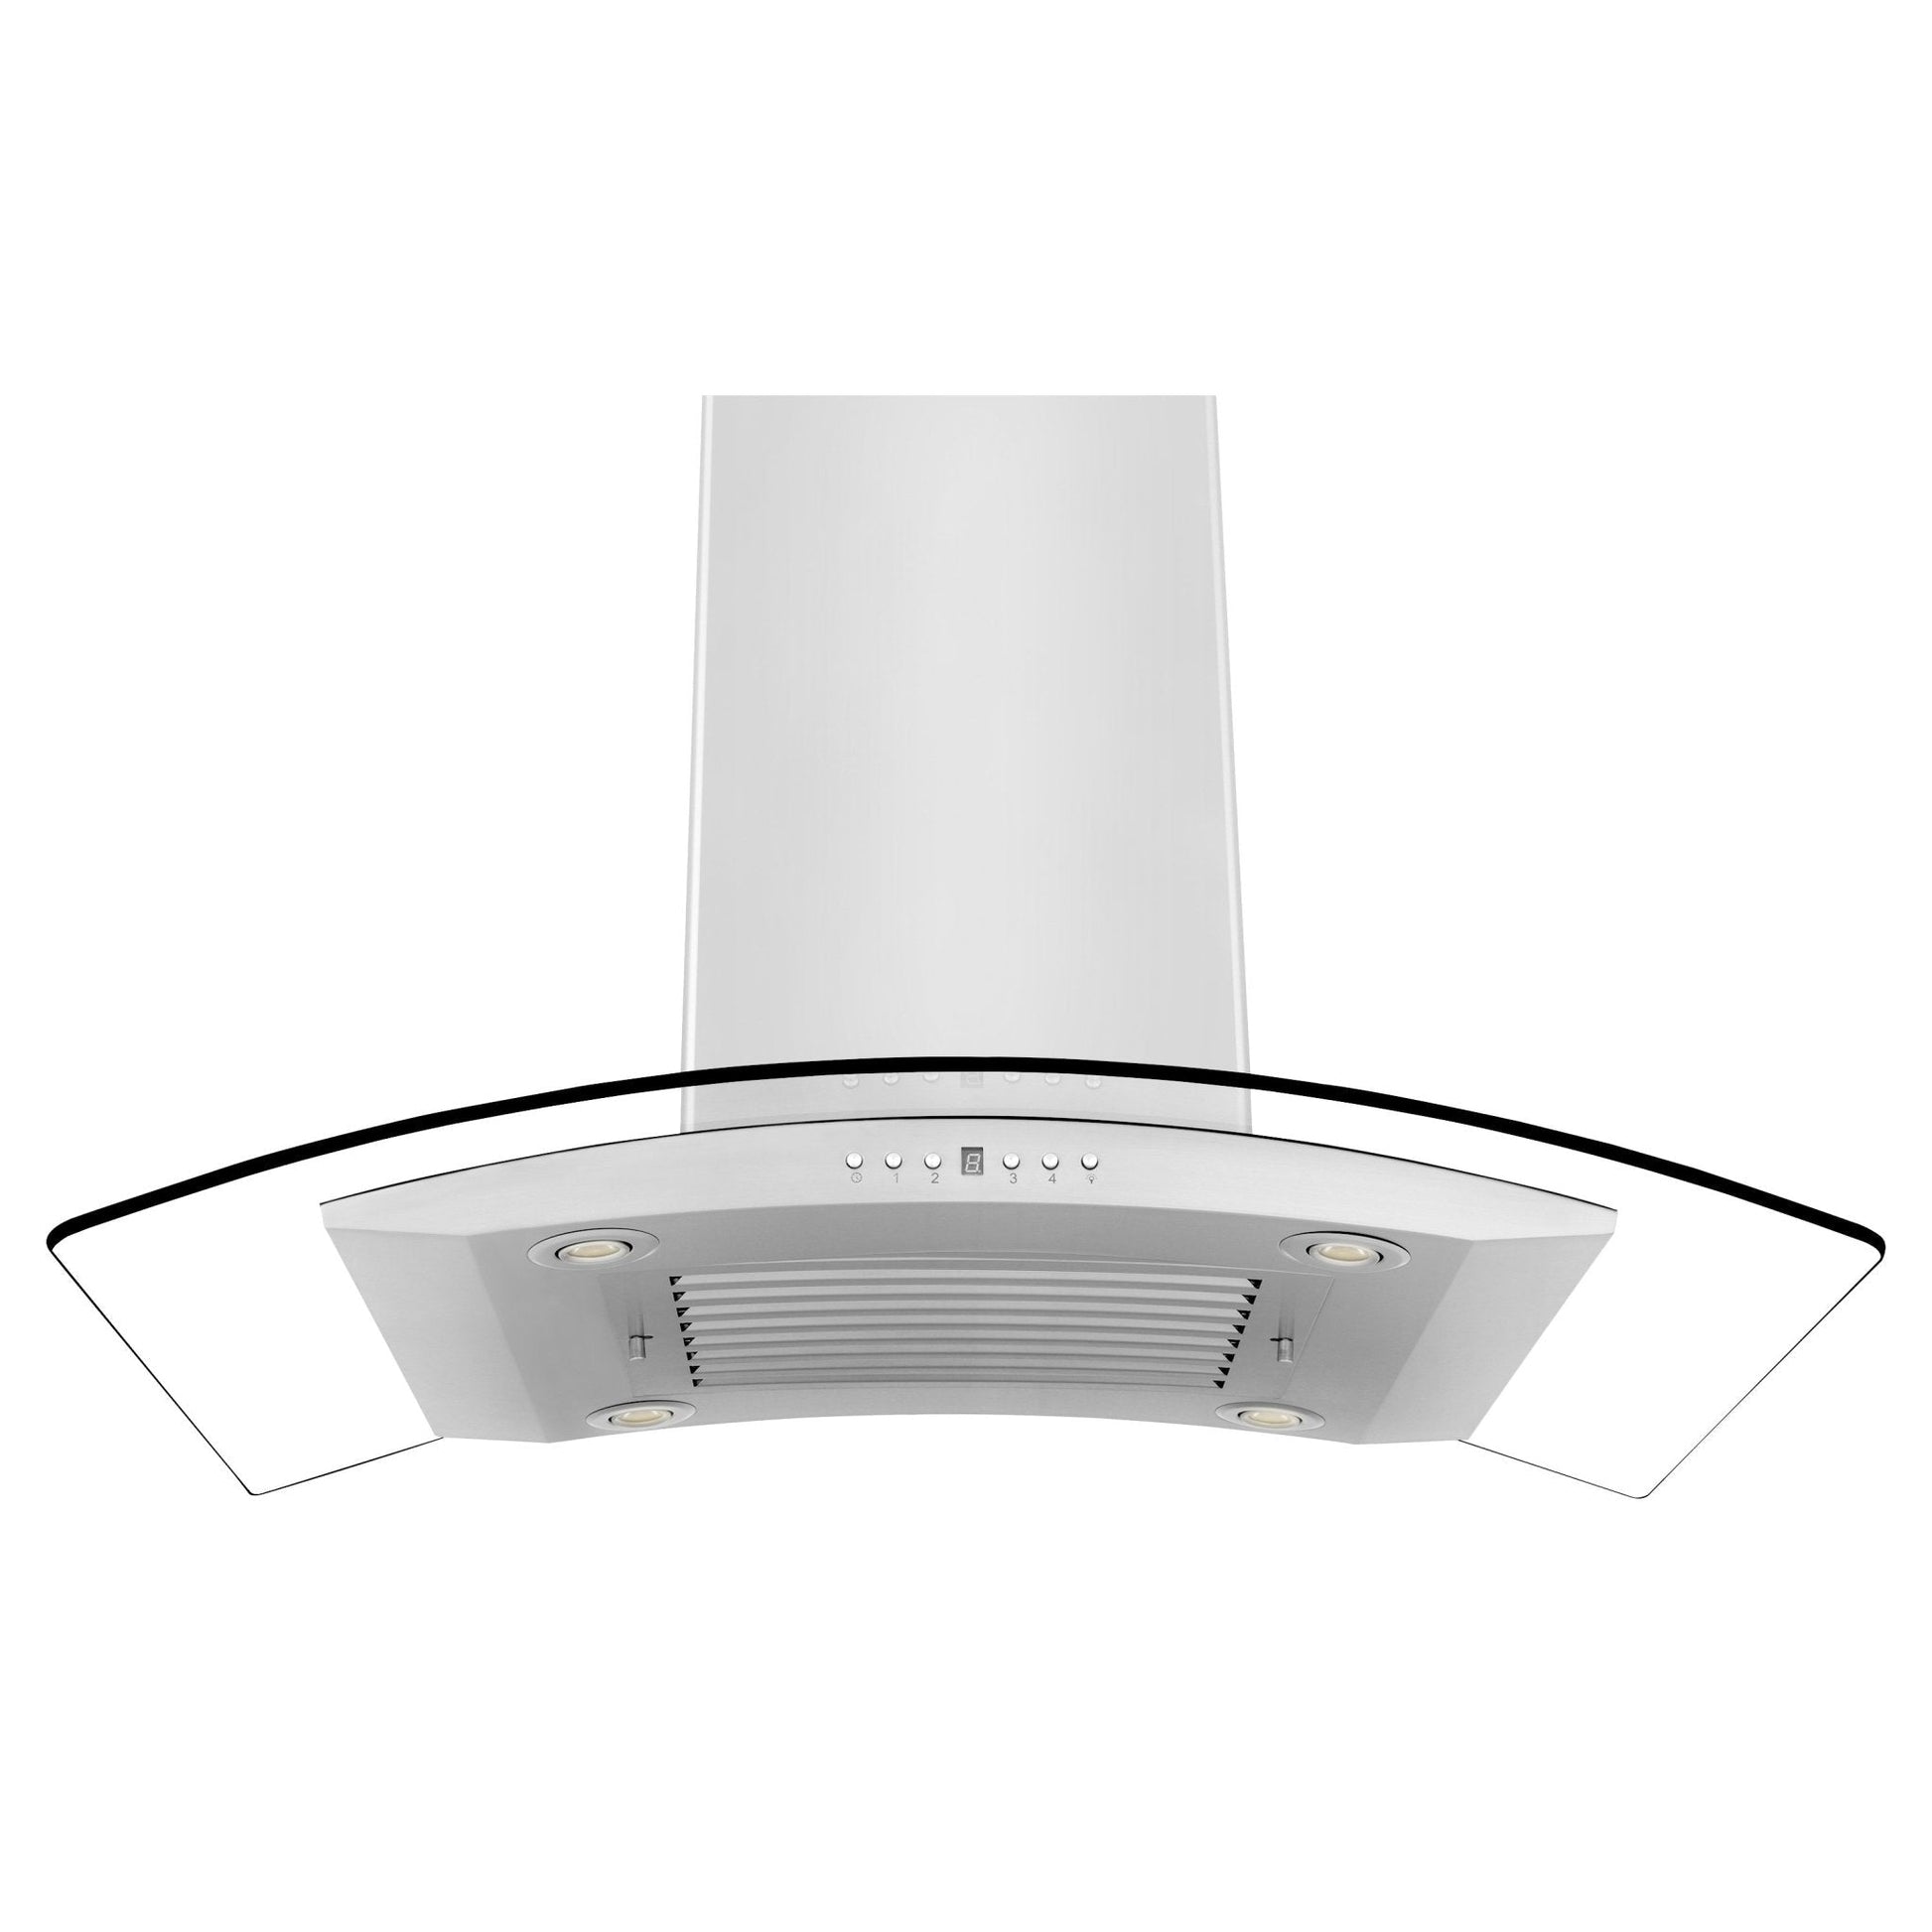 ZLINE Convertible Vent Island Mount Range Hood in Stainless Steel and Glass (GL14i) front, under.